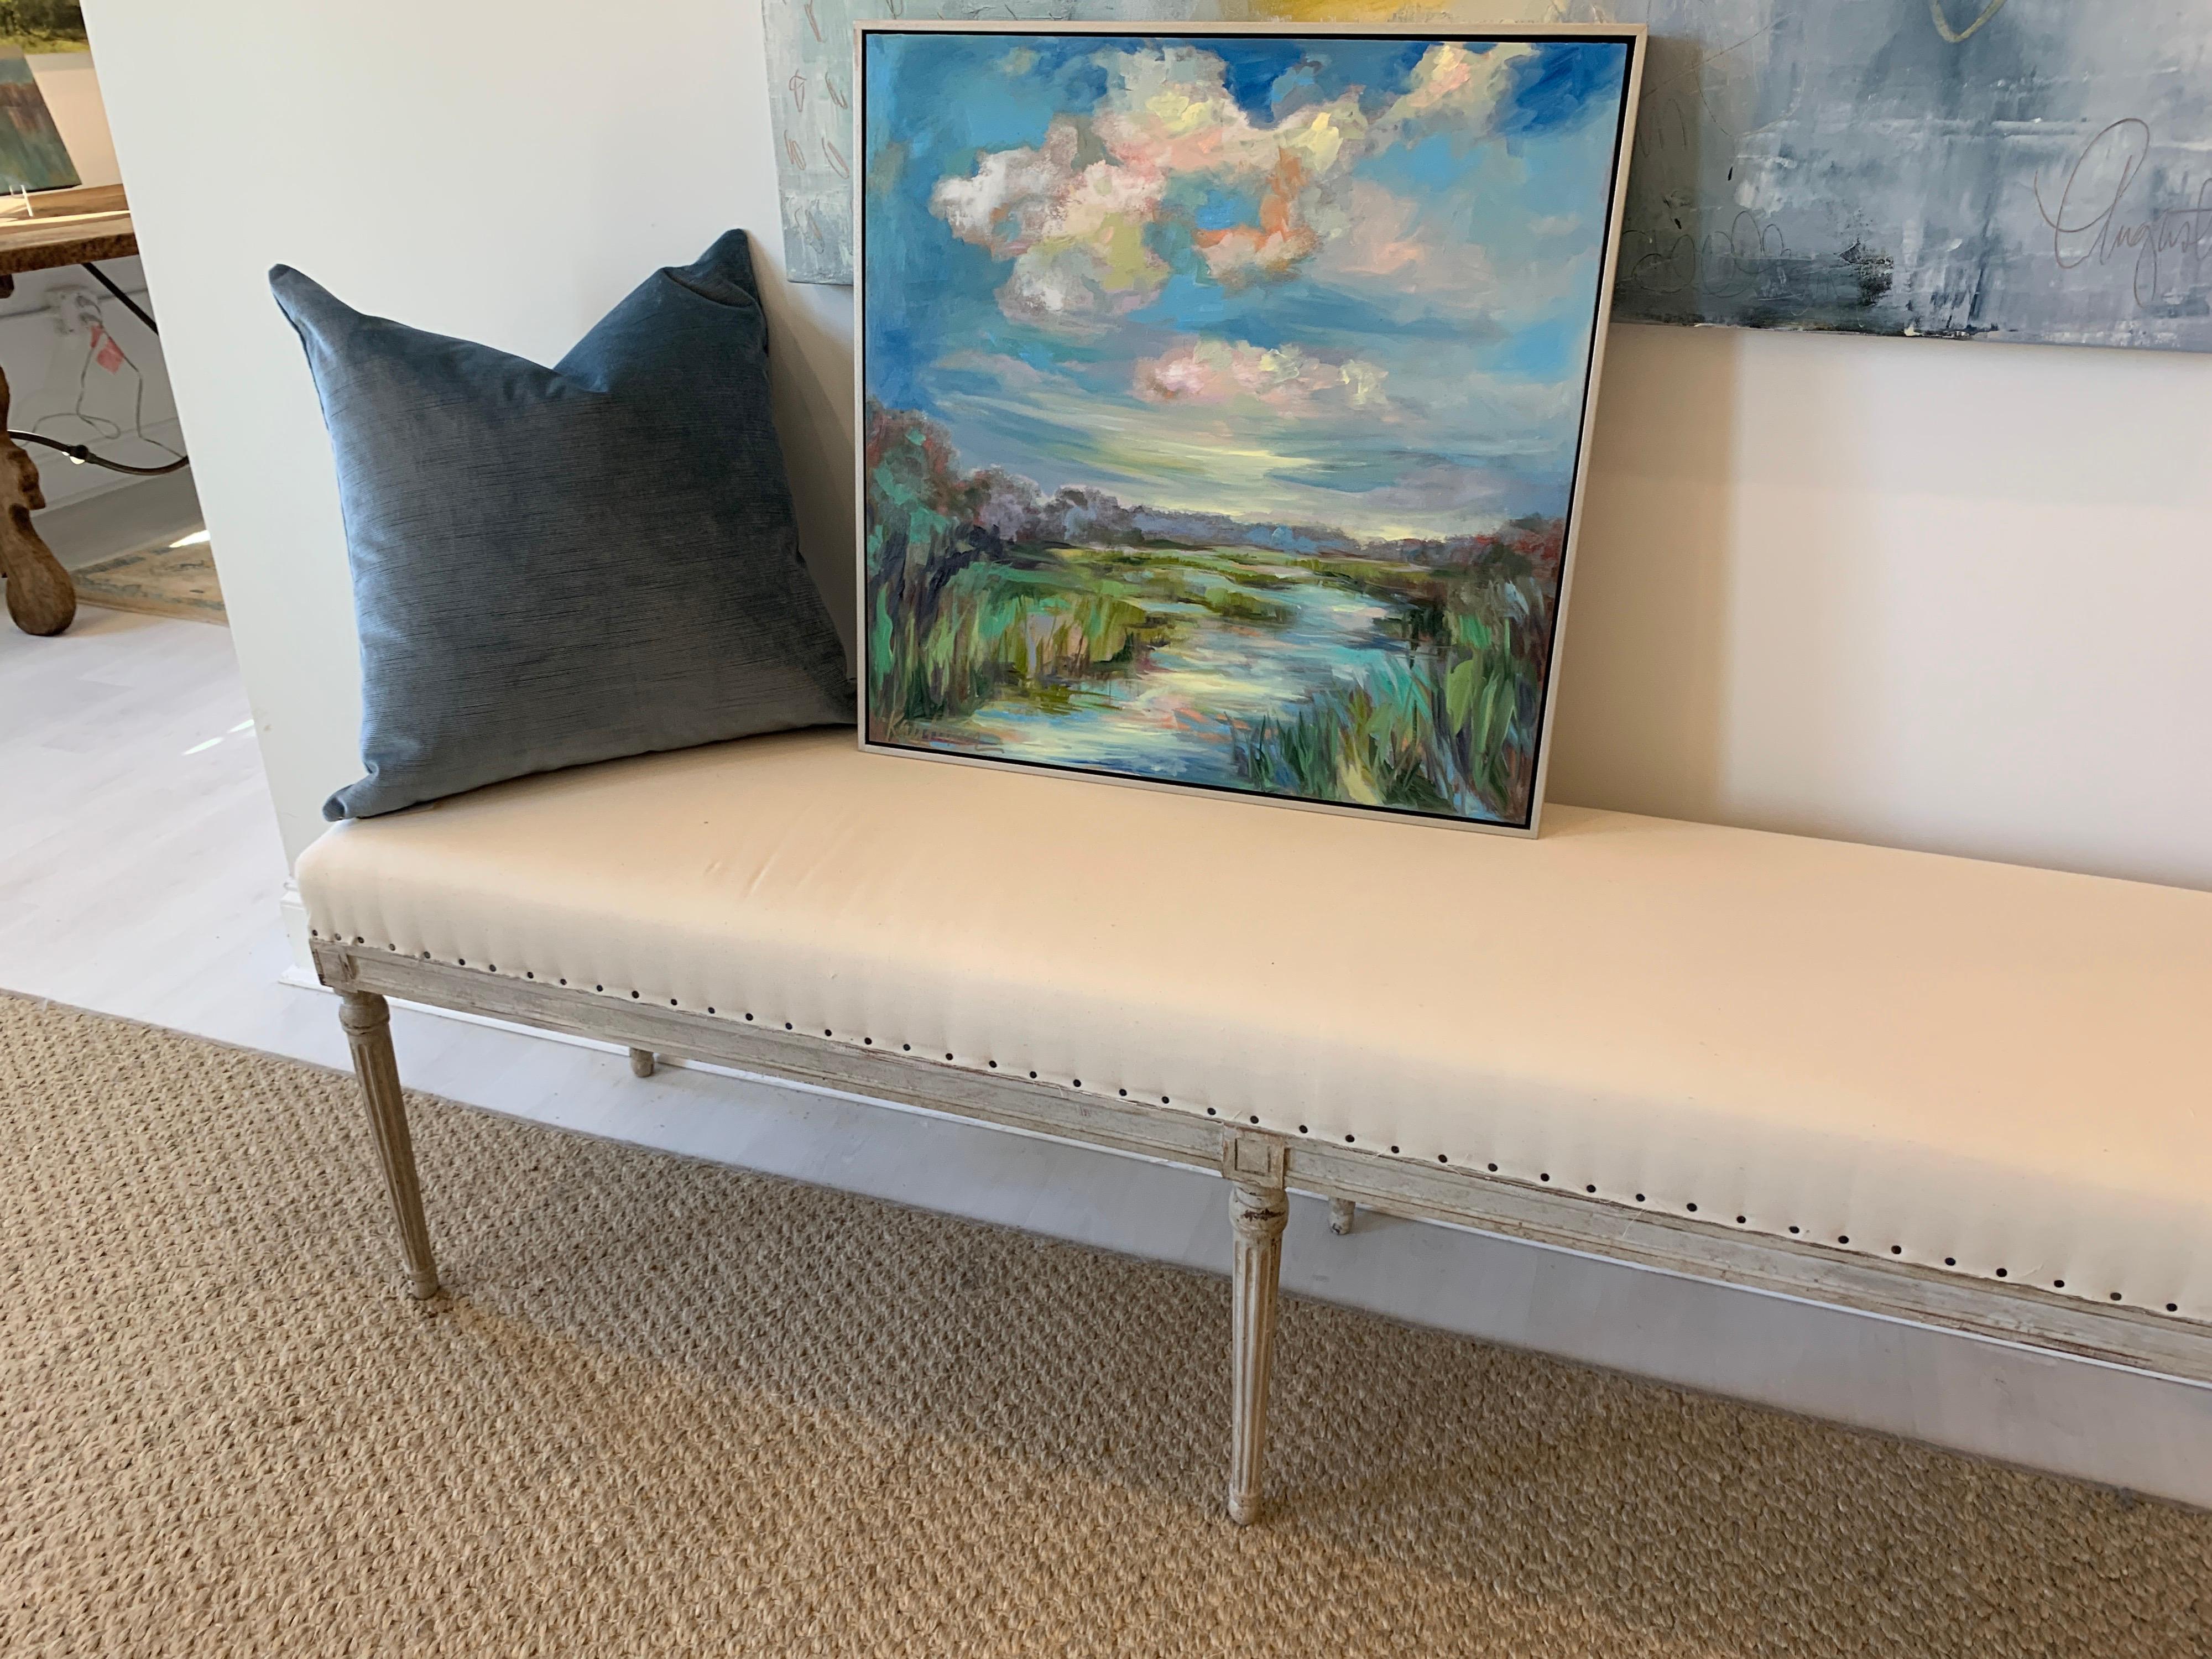 'Cloud Escape' is a medium framed oil and wax on canvas abstracted landscape created by American artist Kelli Kaufman in 2021. Featuring a palette mostly made of blue and green, this square format piece depicts a marsh on the Gulf Coast. The central